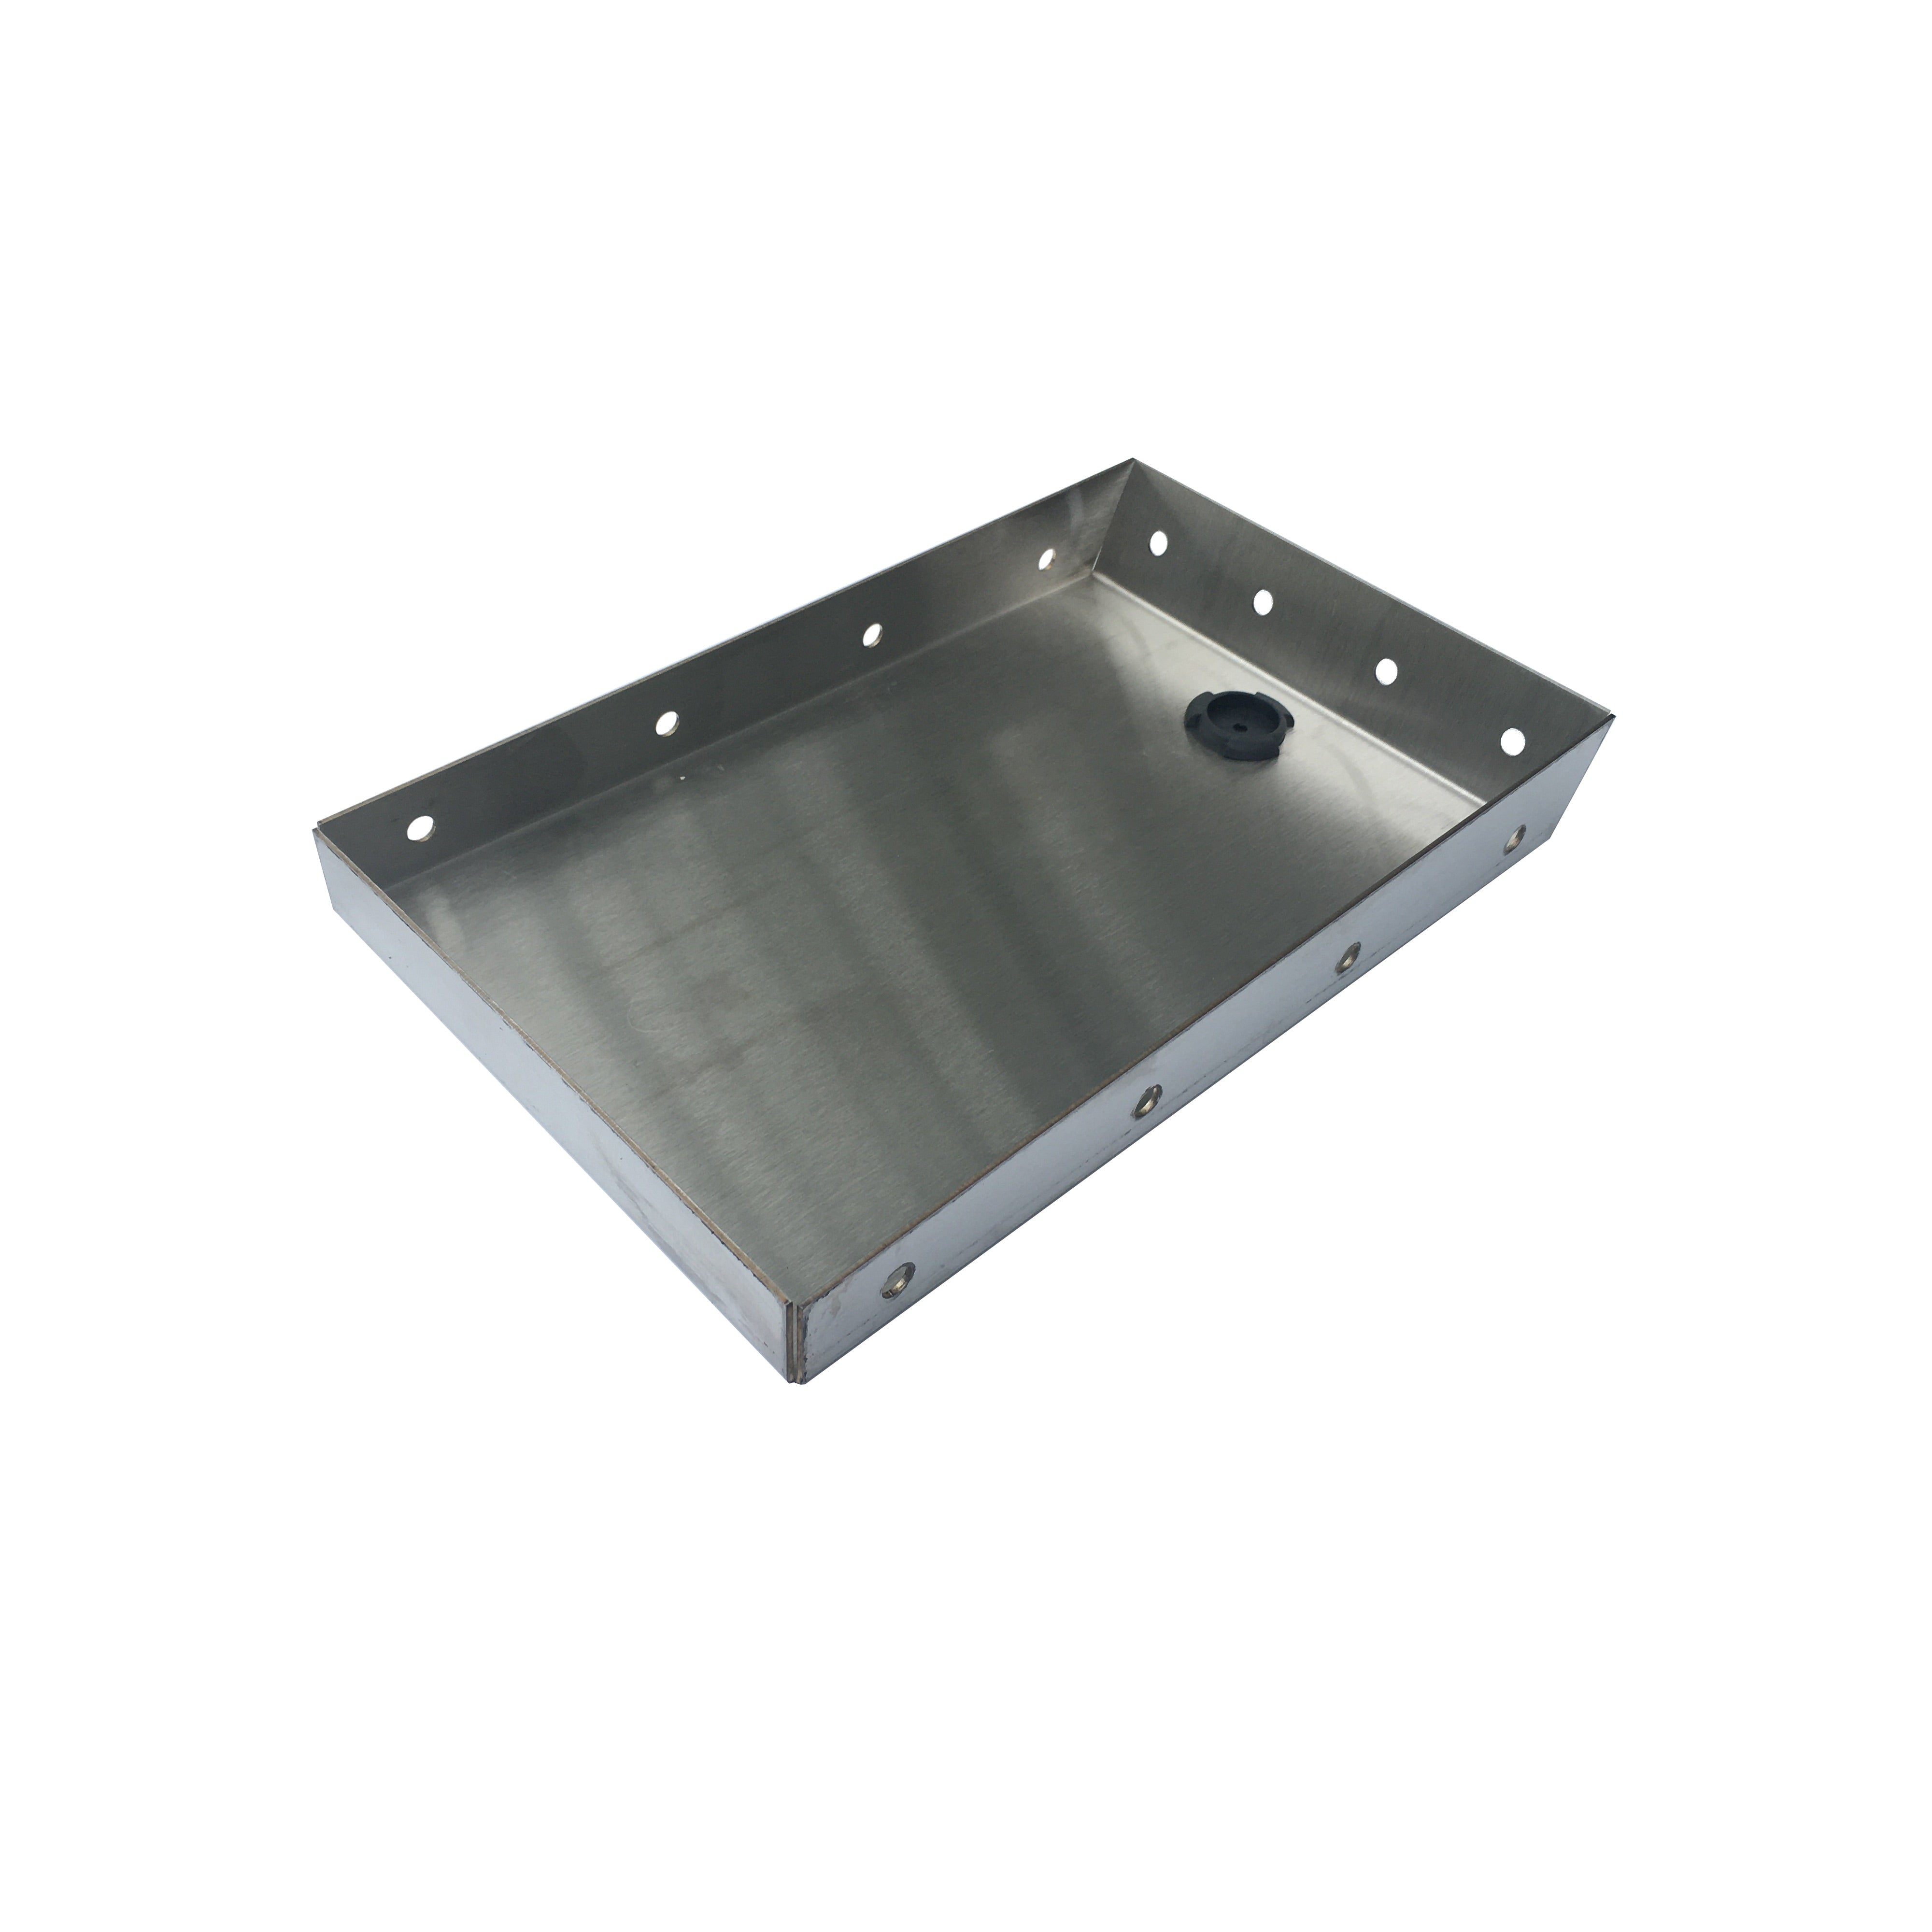 Point of Sale POS Kitchen 304 Brushed Stainless Steel Printer Shelf 6.5" x 10"